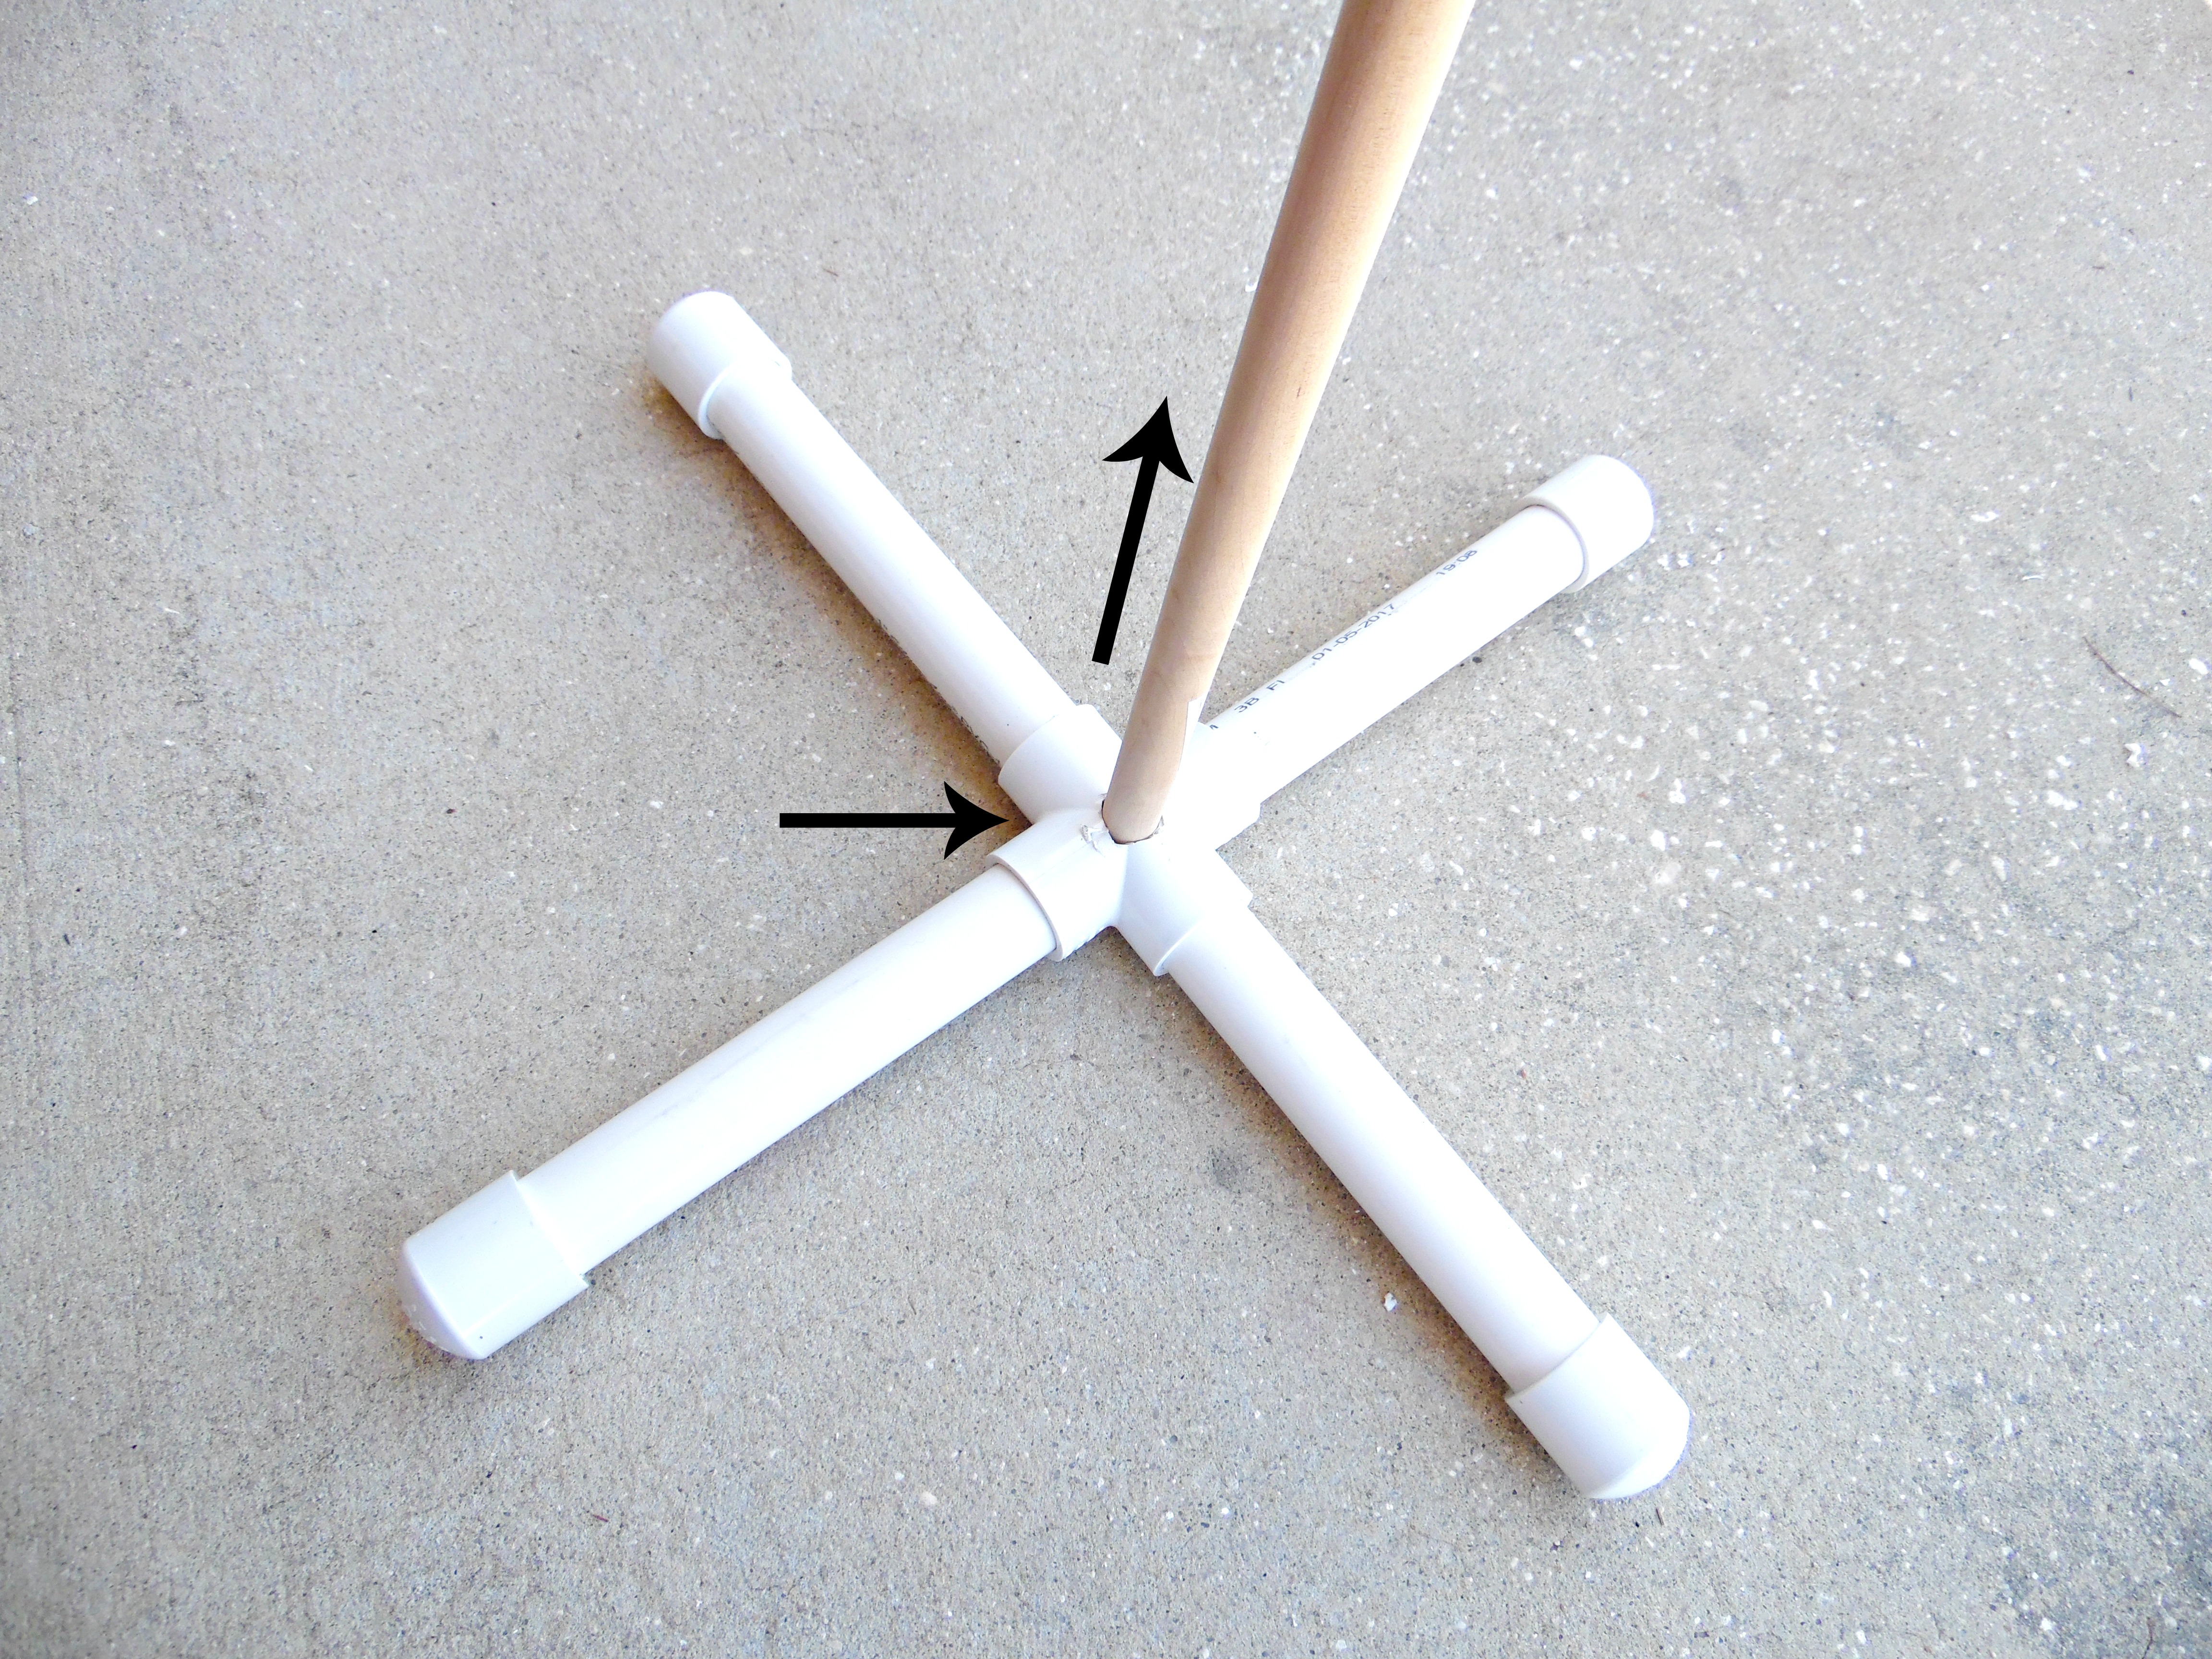 This image shows a plain wooden dowel – the giant paper flower stem – placed in the center of the PVC pipe stand. 